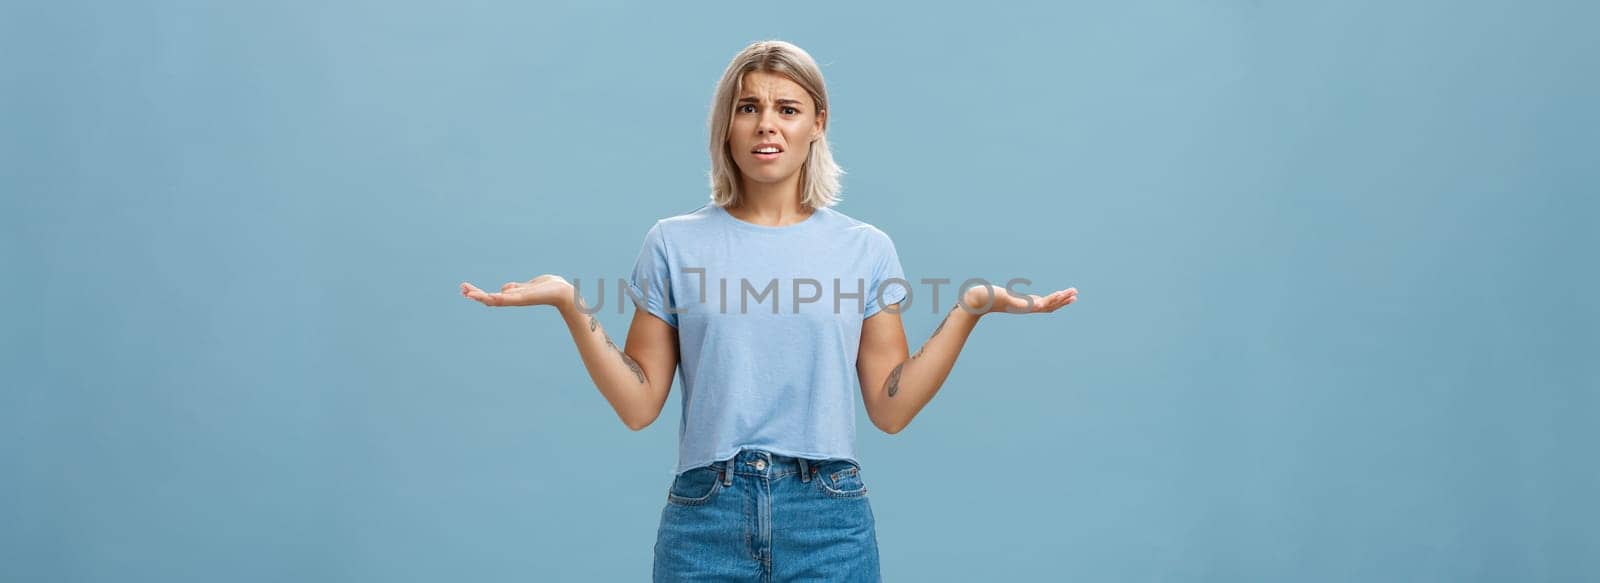 Girl feeling struggles to understand what happening. Confused perplexed intense good-looking female with fair hair shrugging with hands spread aside in displeased clueless pose posing over blue wall.